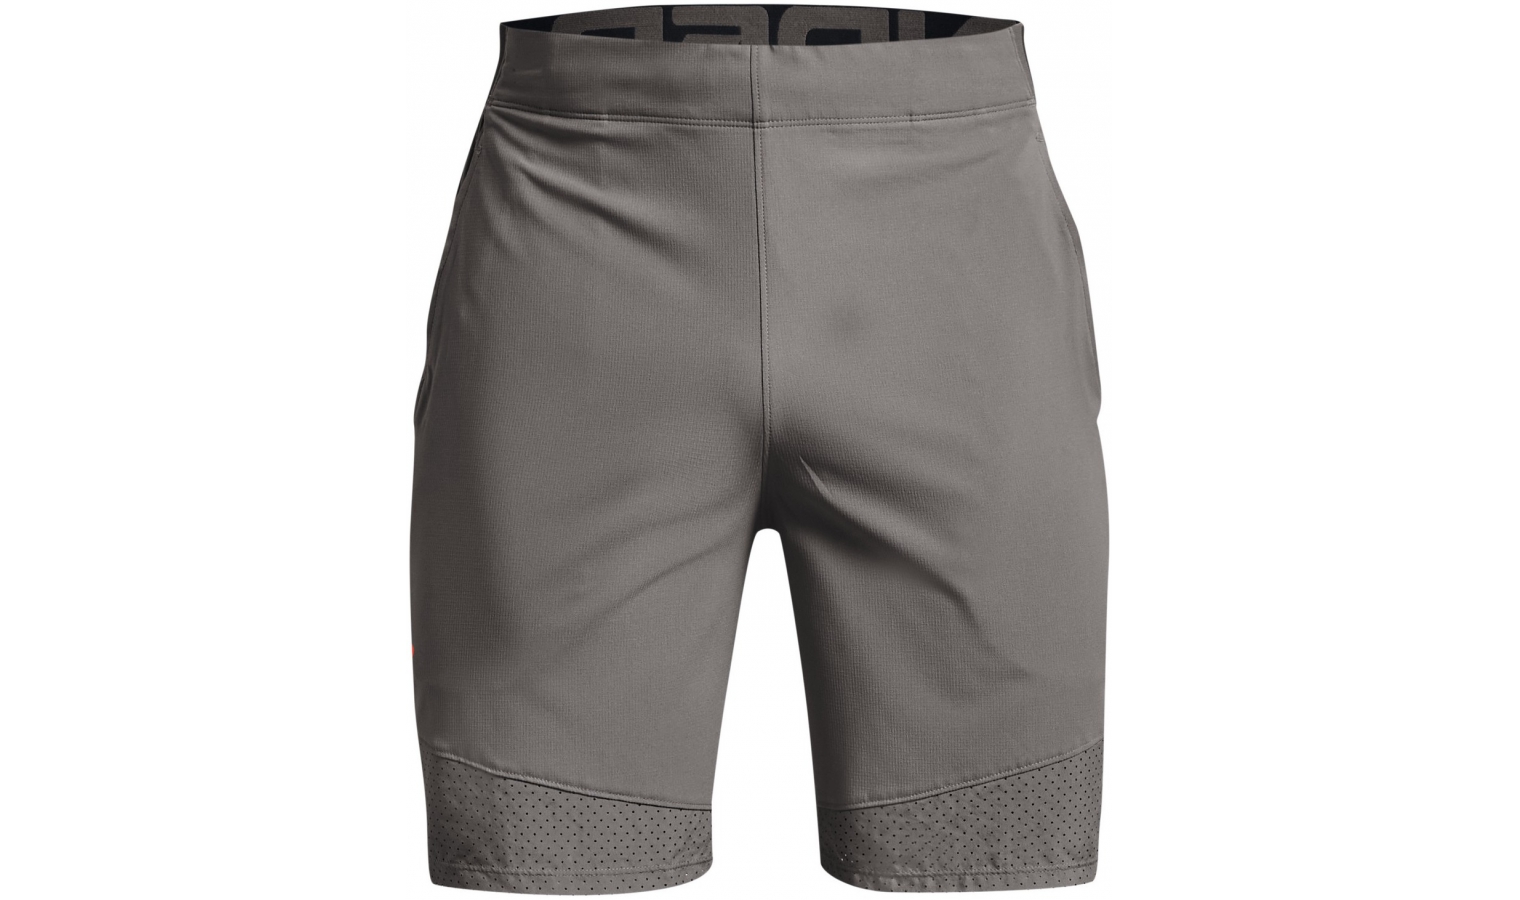 Shorts Under Armour UA Vanish Woven 8in Shorts-GRY 